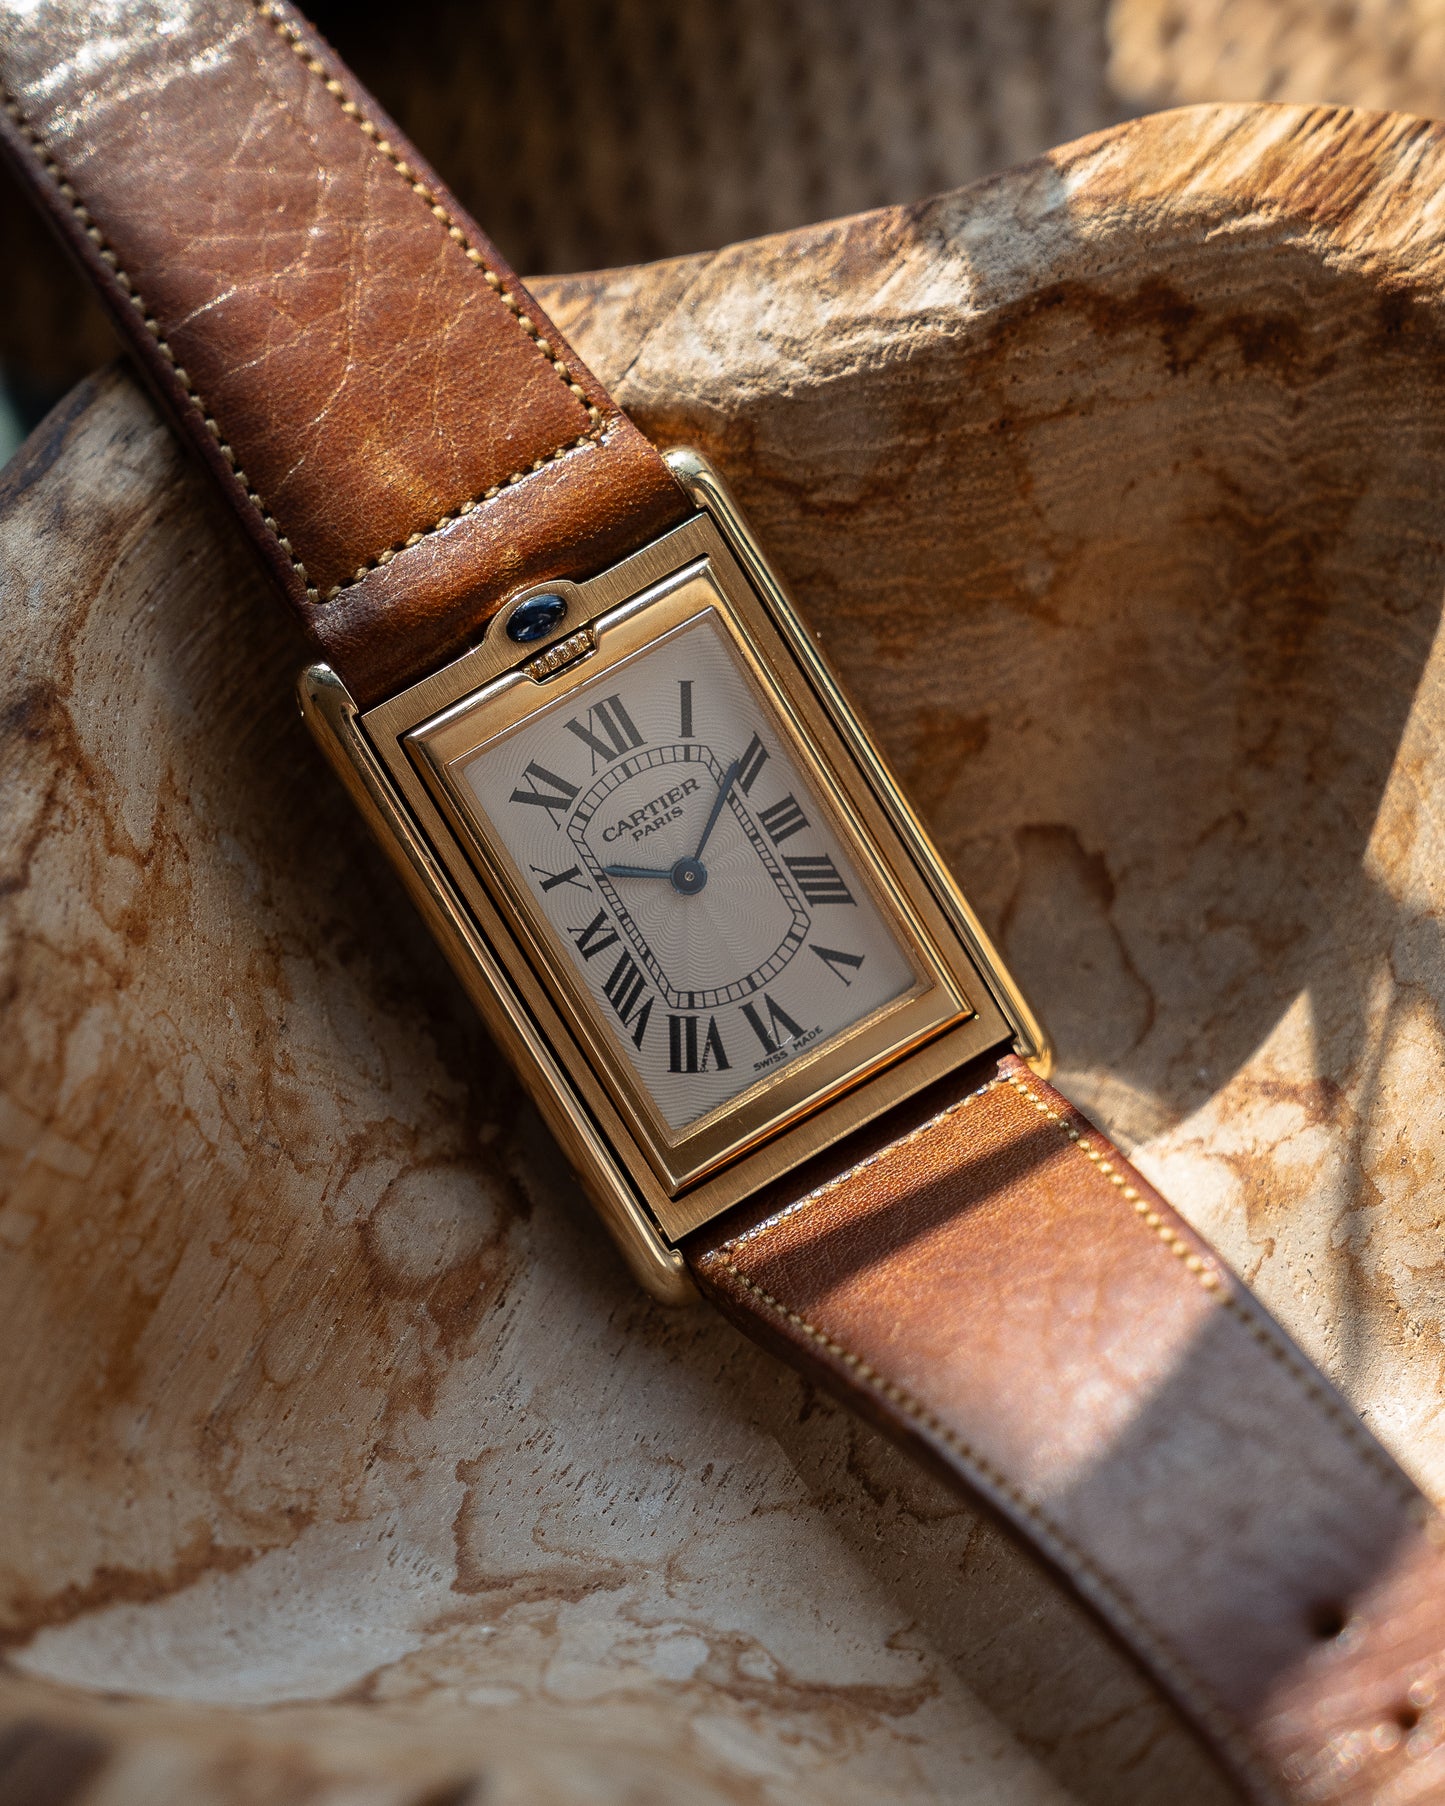 Cartier Tank Basculante CPCP "Collection Prive", Millenium Limited Edition ref 2391 in Yellow Gold, full set (Price on Request)